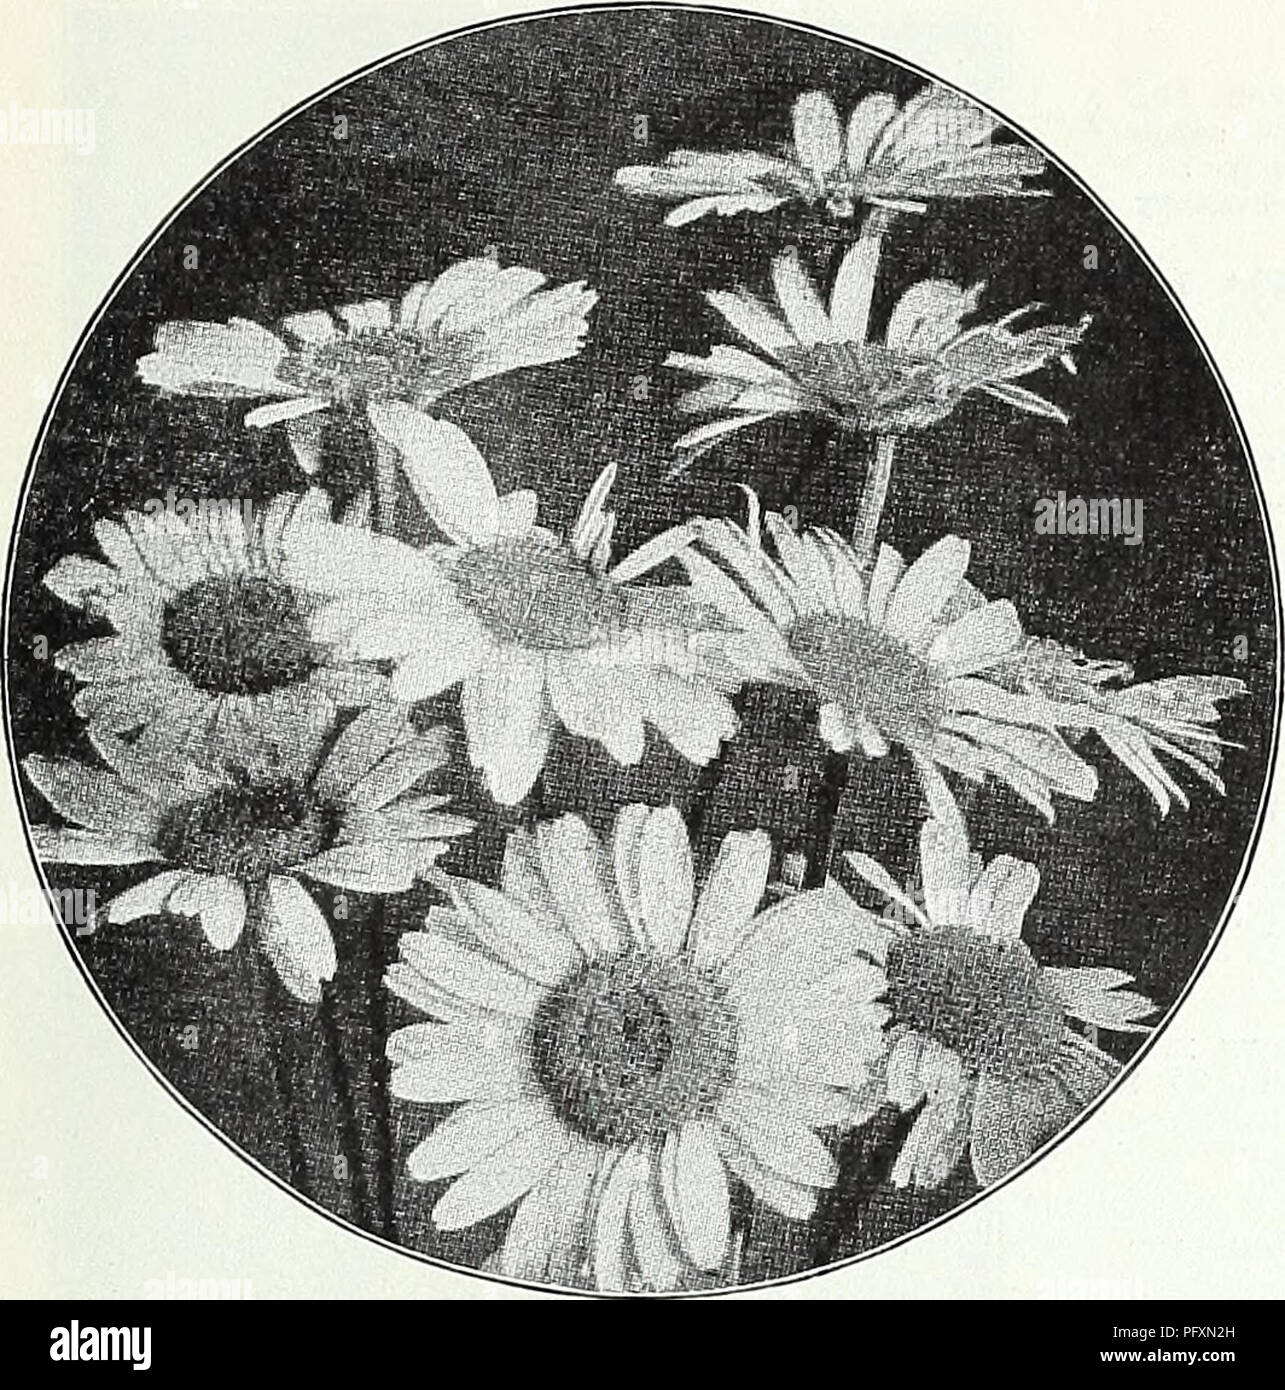 . Currie's garden annual : spring, 1935 60th year. Flowers Seeds Catalogs; Bulbs (Plants) Seeds Catalogs; Vegetables Seeds Catalogs; Nurseries (Horticulture) Catalogs; Plants, Ornamental Catalogs; Gardening Equipment and supplies Catalogs. CURRIE BROTHERS CO., MILWAUKEE, WIS Page 43. ARABIS (Rock Cress) ALPINA—A hardy perennial and one of the earliest and pretti- est spring flowers. The spreading tufts are covered with a sheet of pure white flowers as soon as the snow disappears. Unequalled for rockeries or edging ; withstands the drought, and is always neat. 6 inches. Plants, price, each, 25c Stock Photo